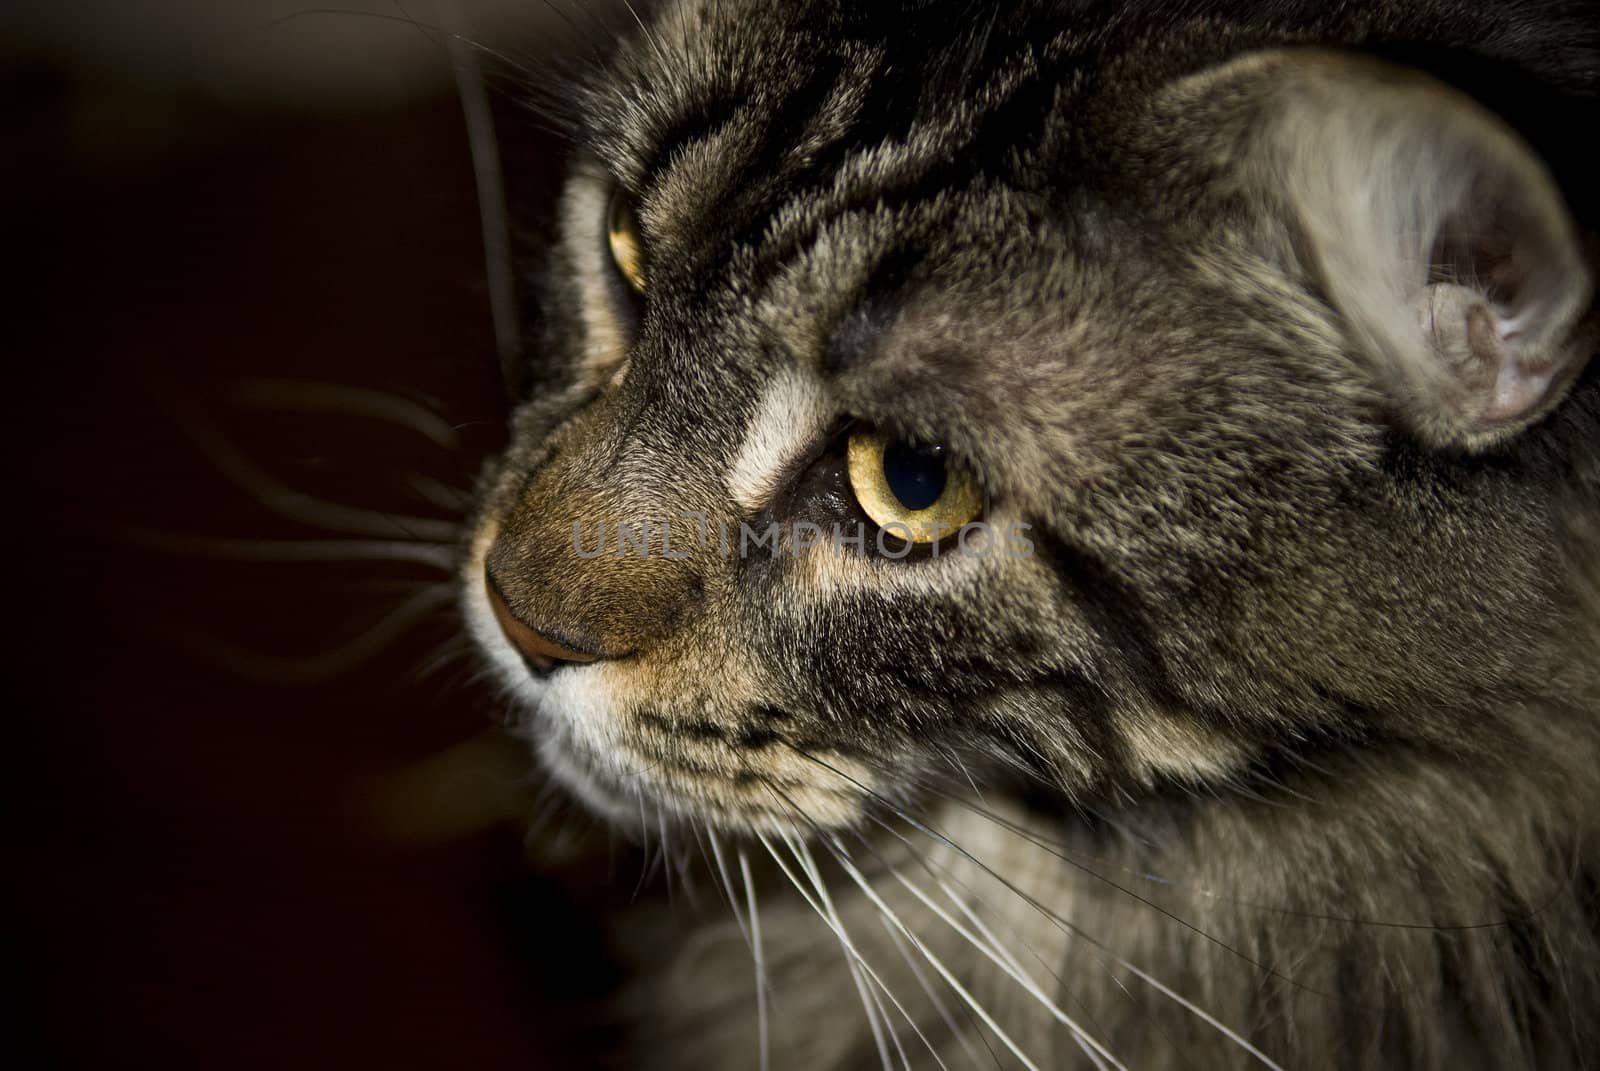 Maine coon brown tabby cat close-up portrait